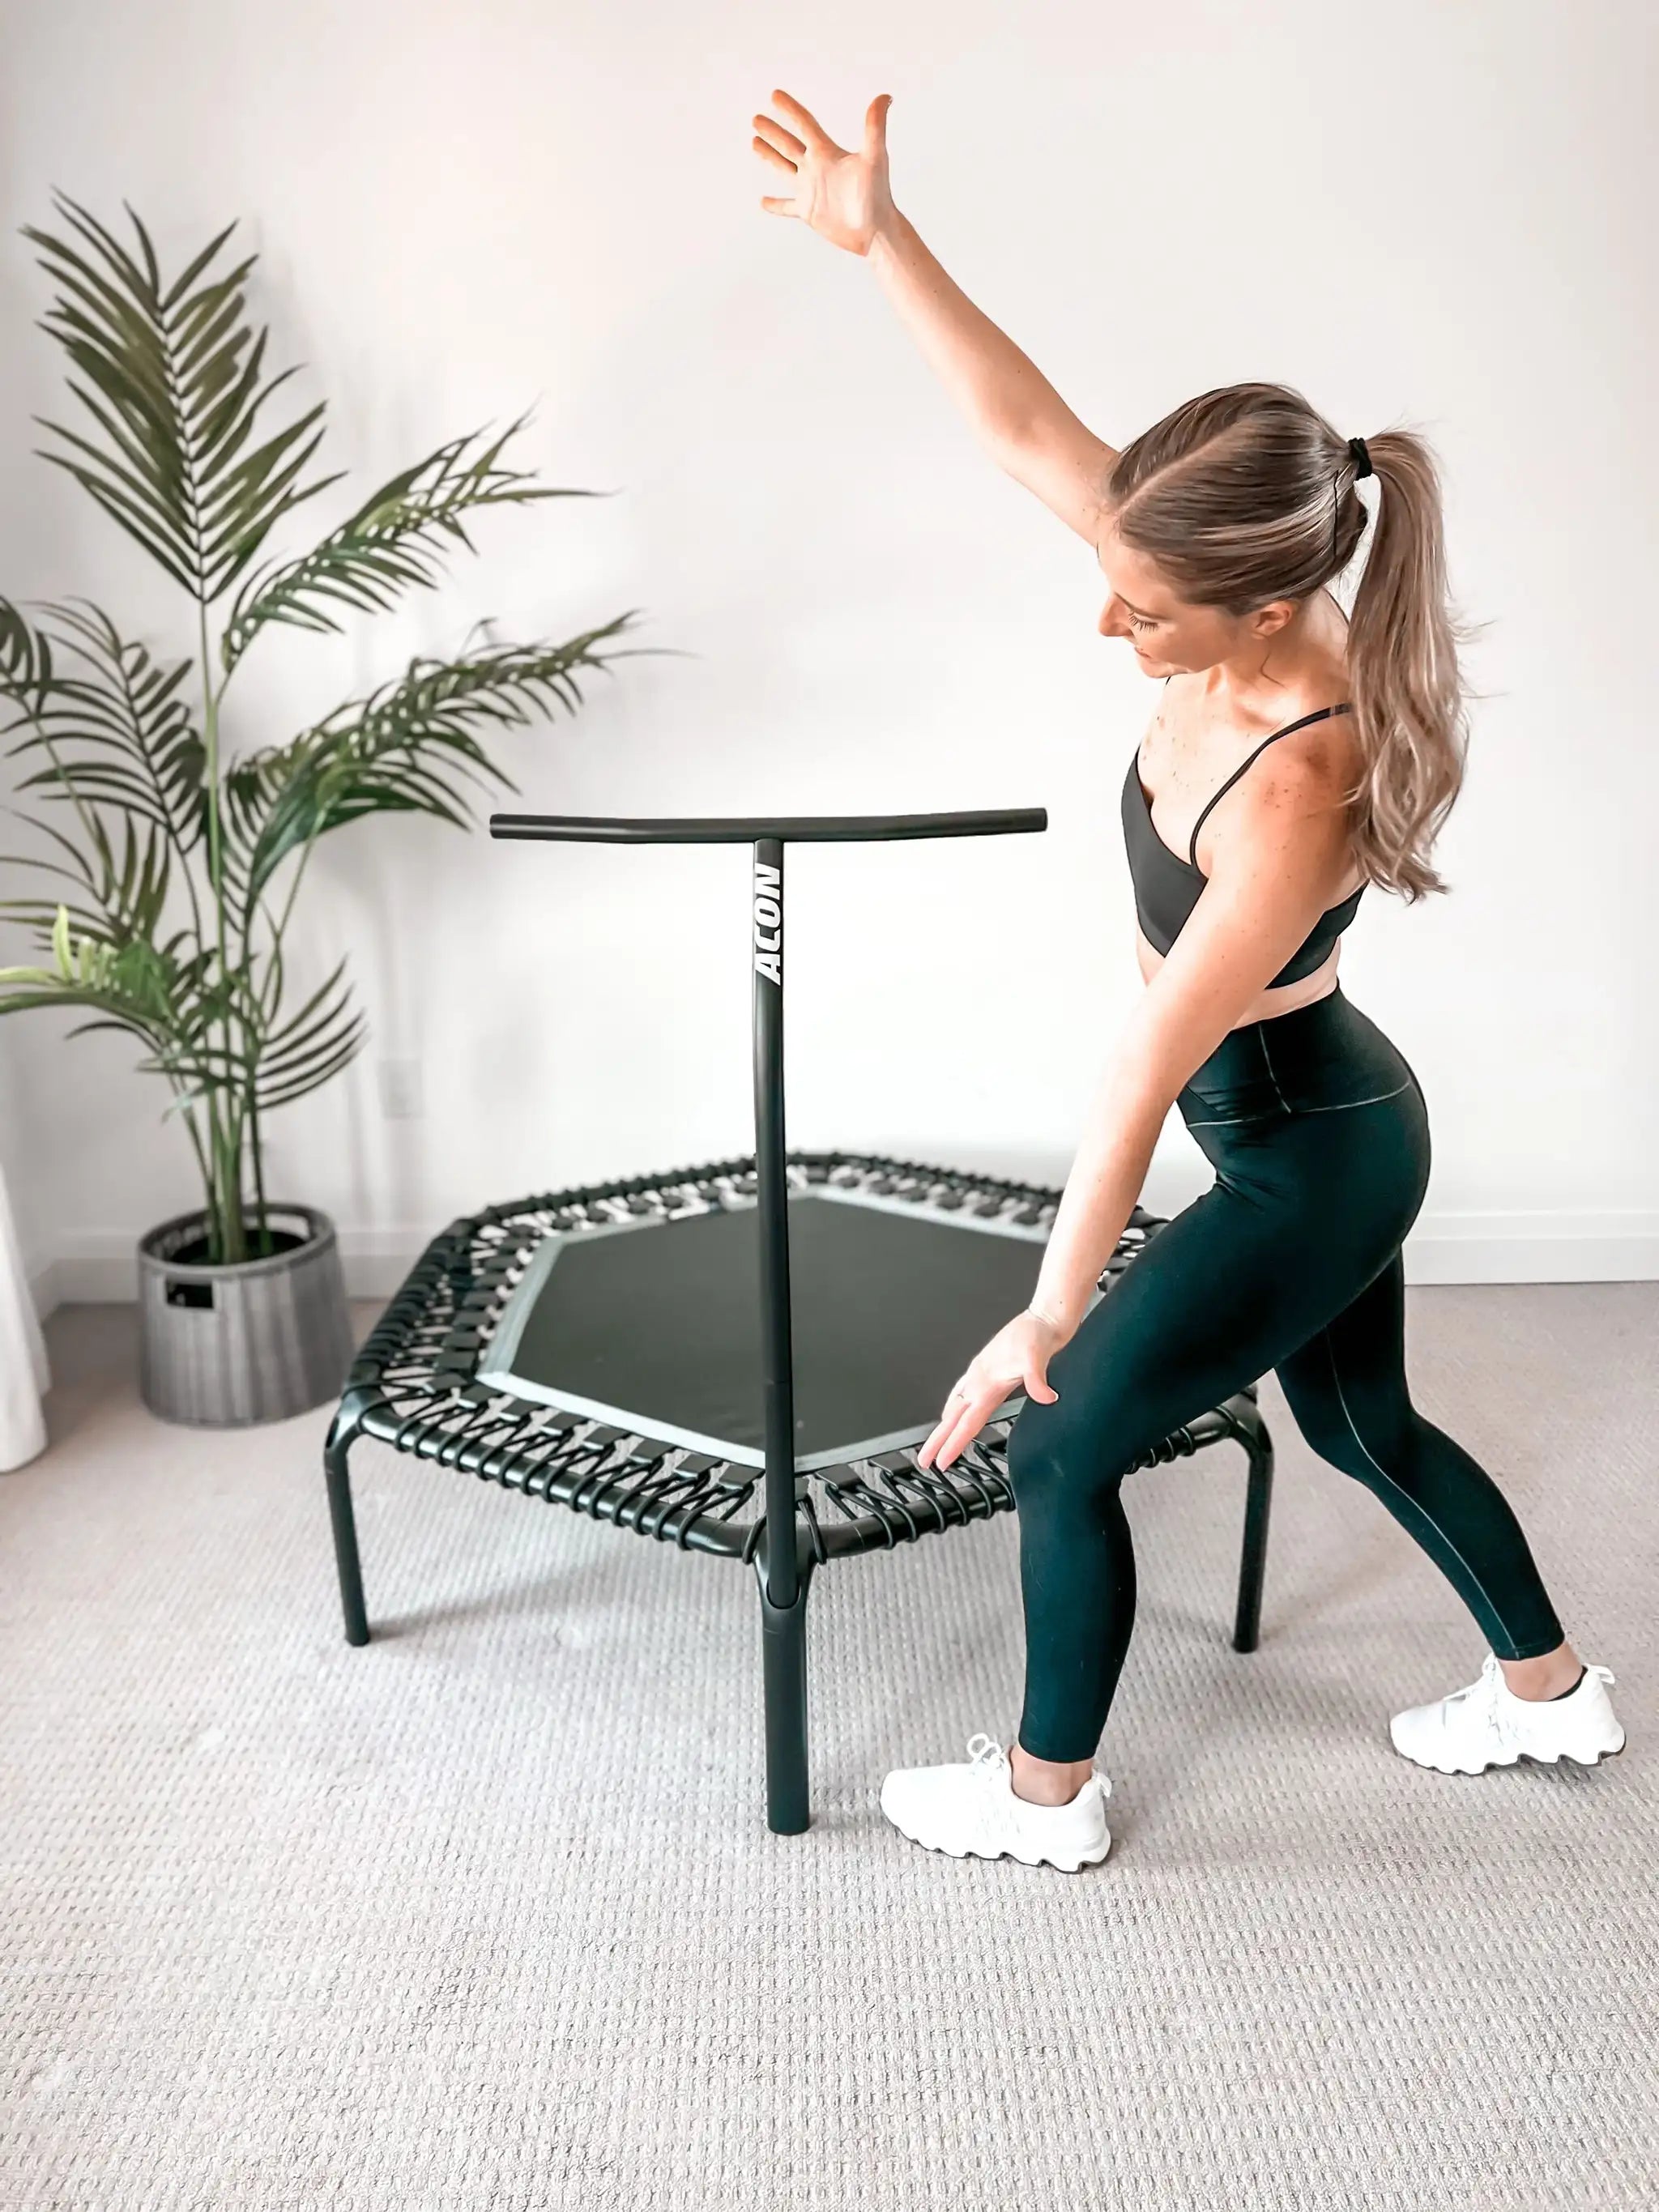 Trampoline vs Running - Which is Better? We Tested – ACON CAN